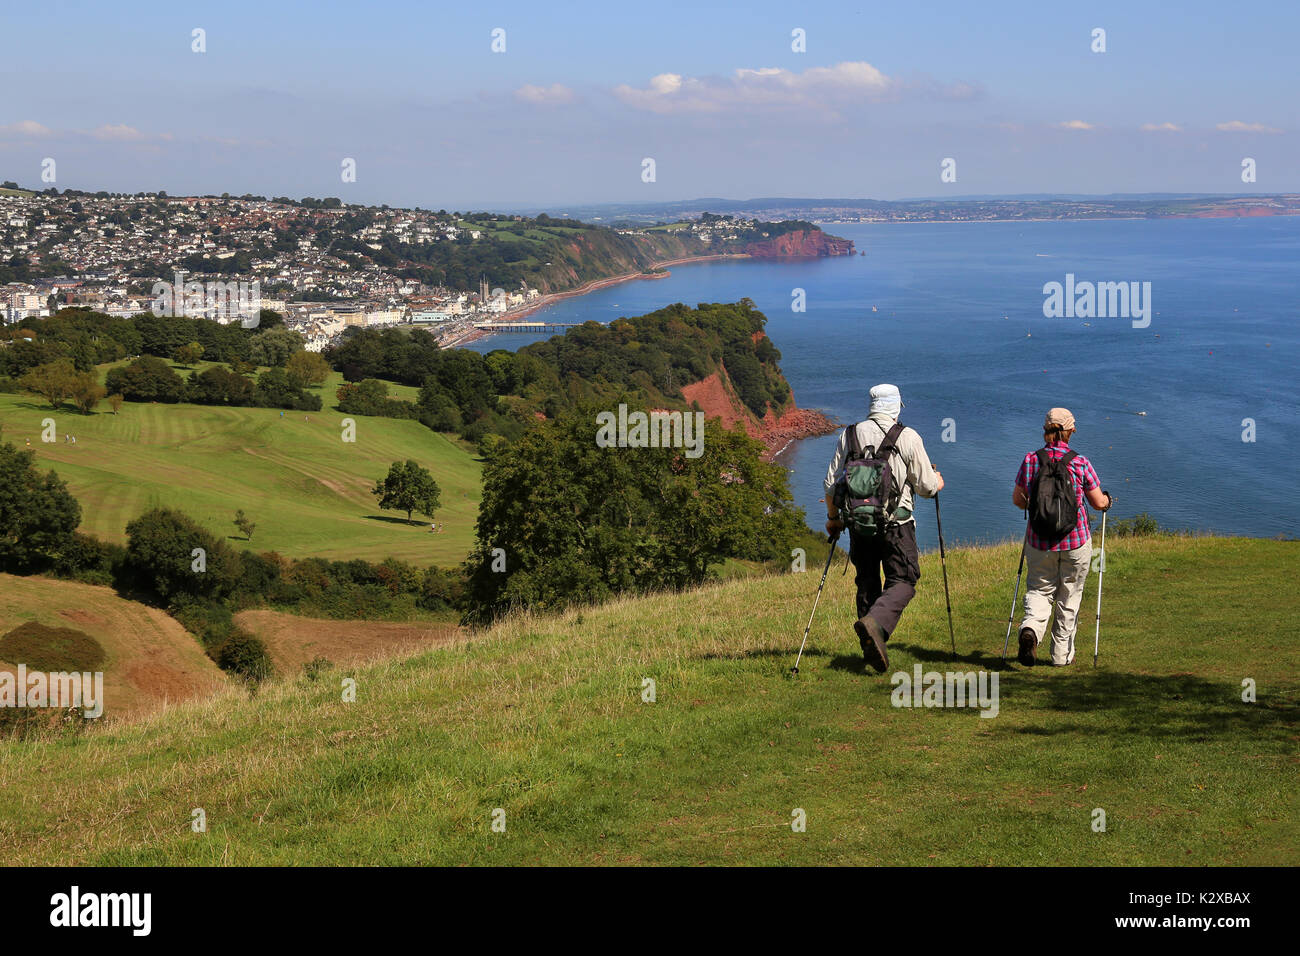 A pair of ramblers enjoy the view along the South West Coast Path looking over Ness Cove and Teignmouth, Devon, UK Stock Photo